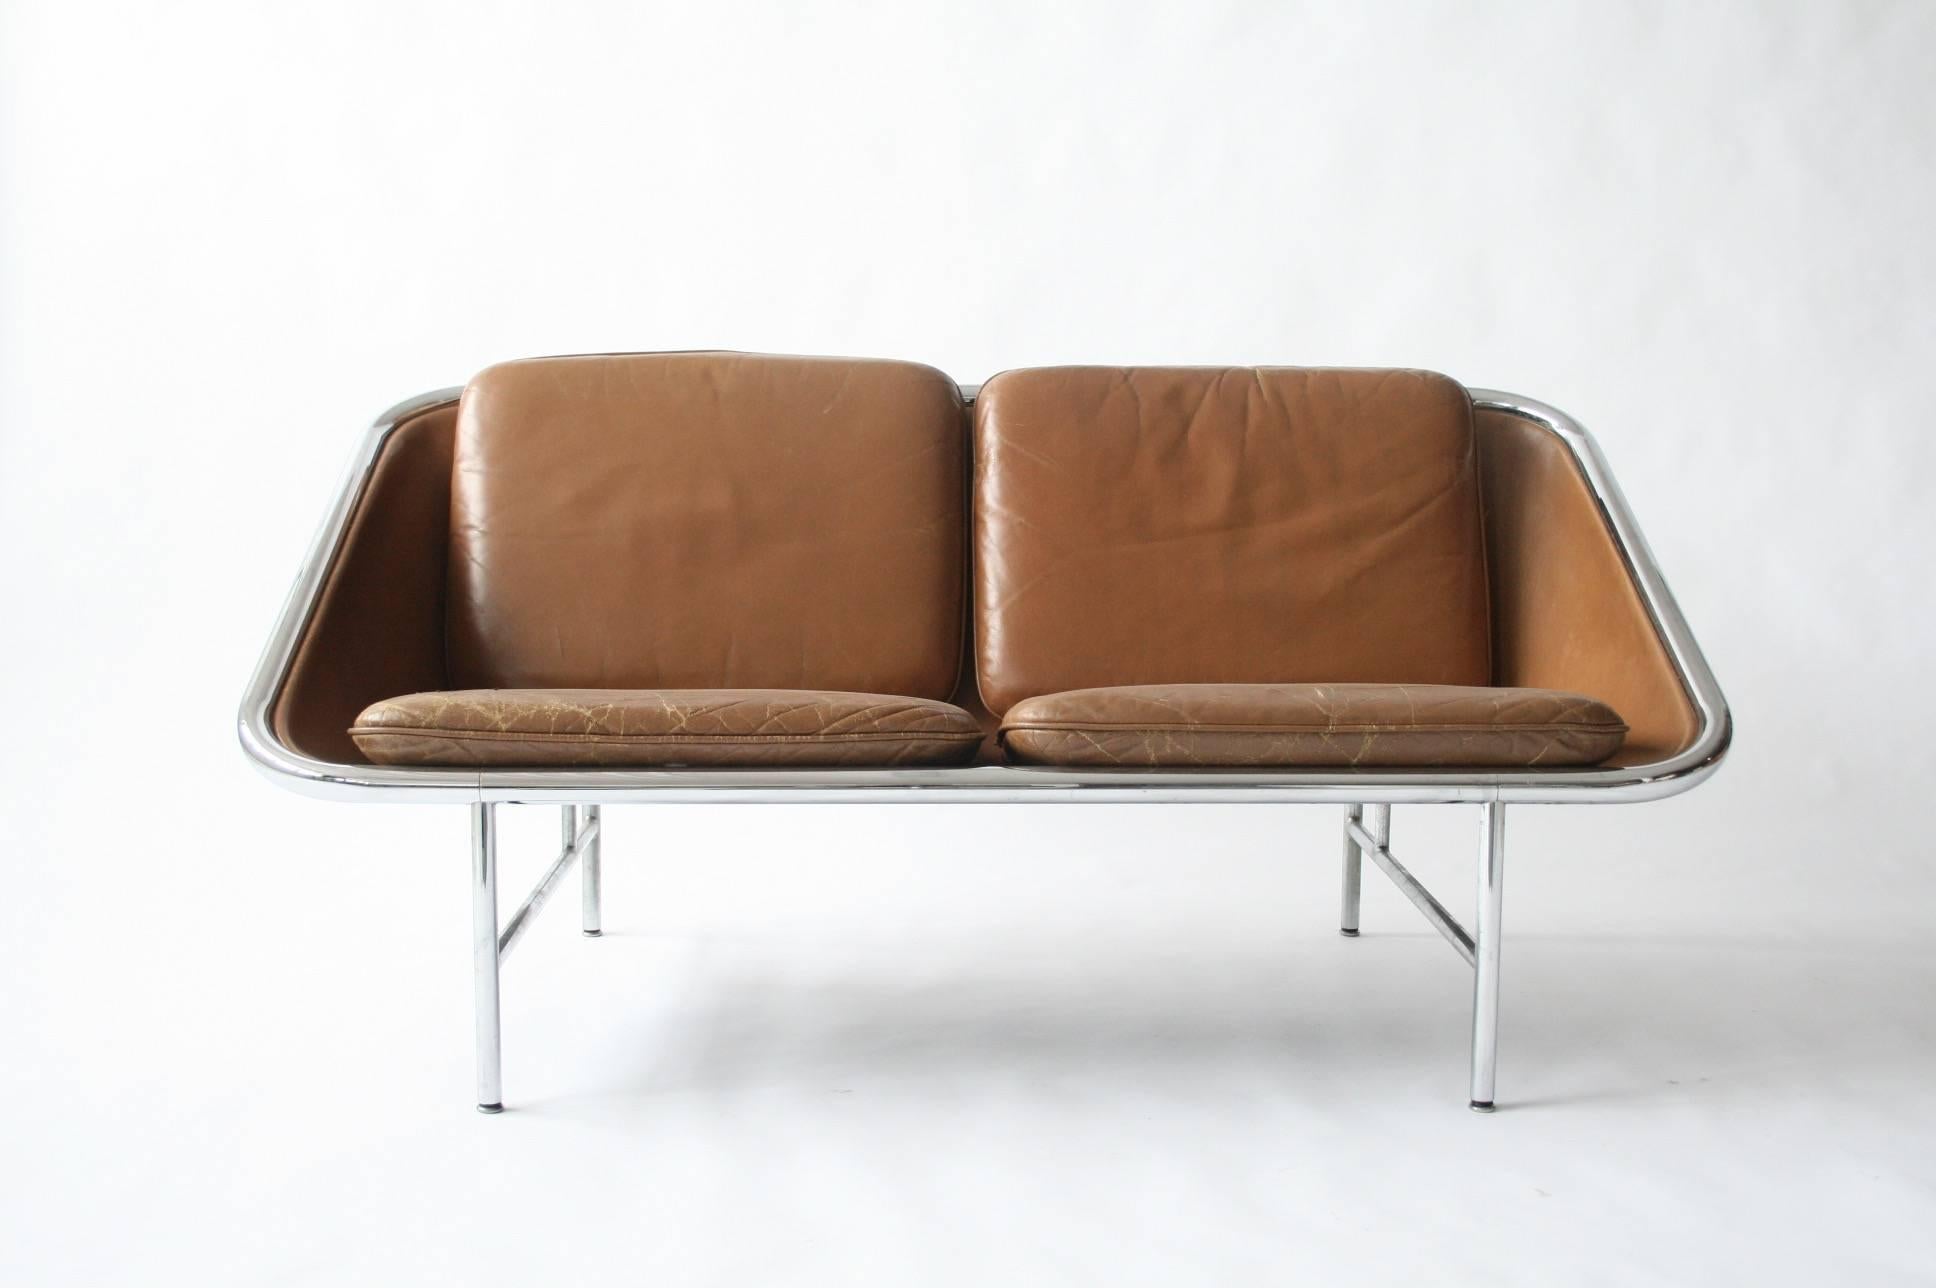 Super rare configuration of an important design by George Nelson & Associates for Herman Miller. In brown original leather. In very fine condition.

Designed in 1963 by John Svezia, Ronal Beckman and Irving Harper for George Nelson and Assoc. the